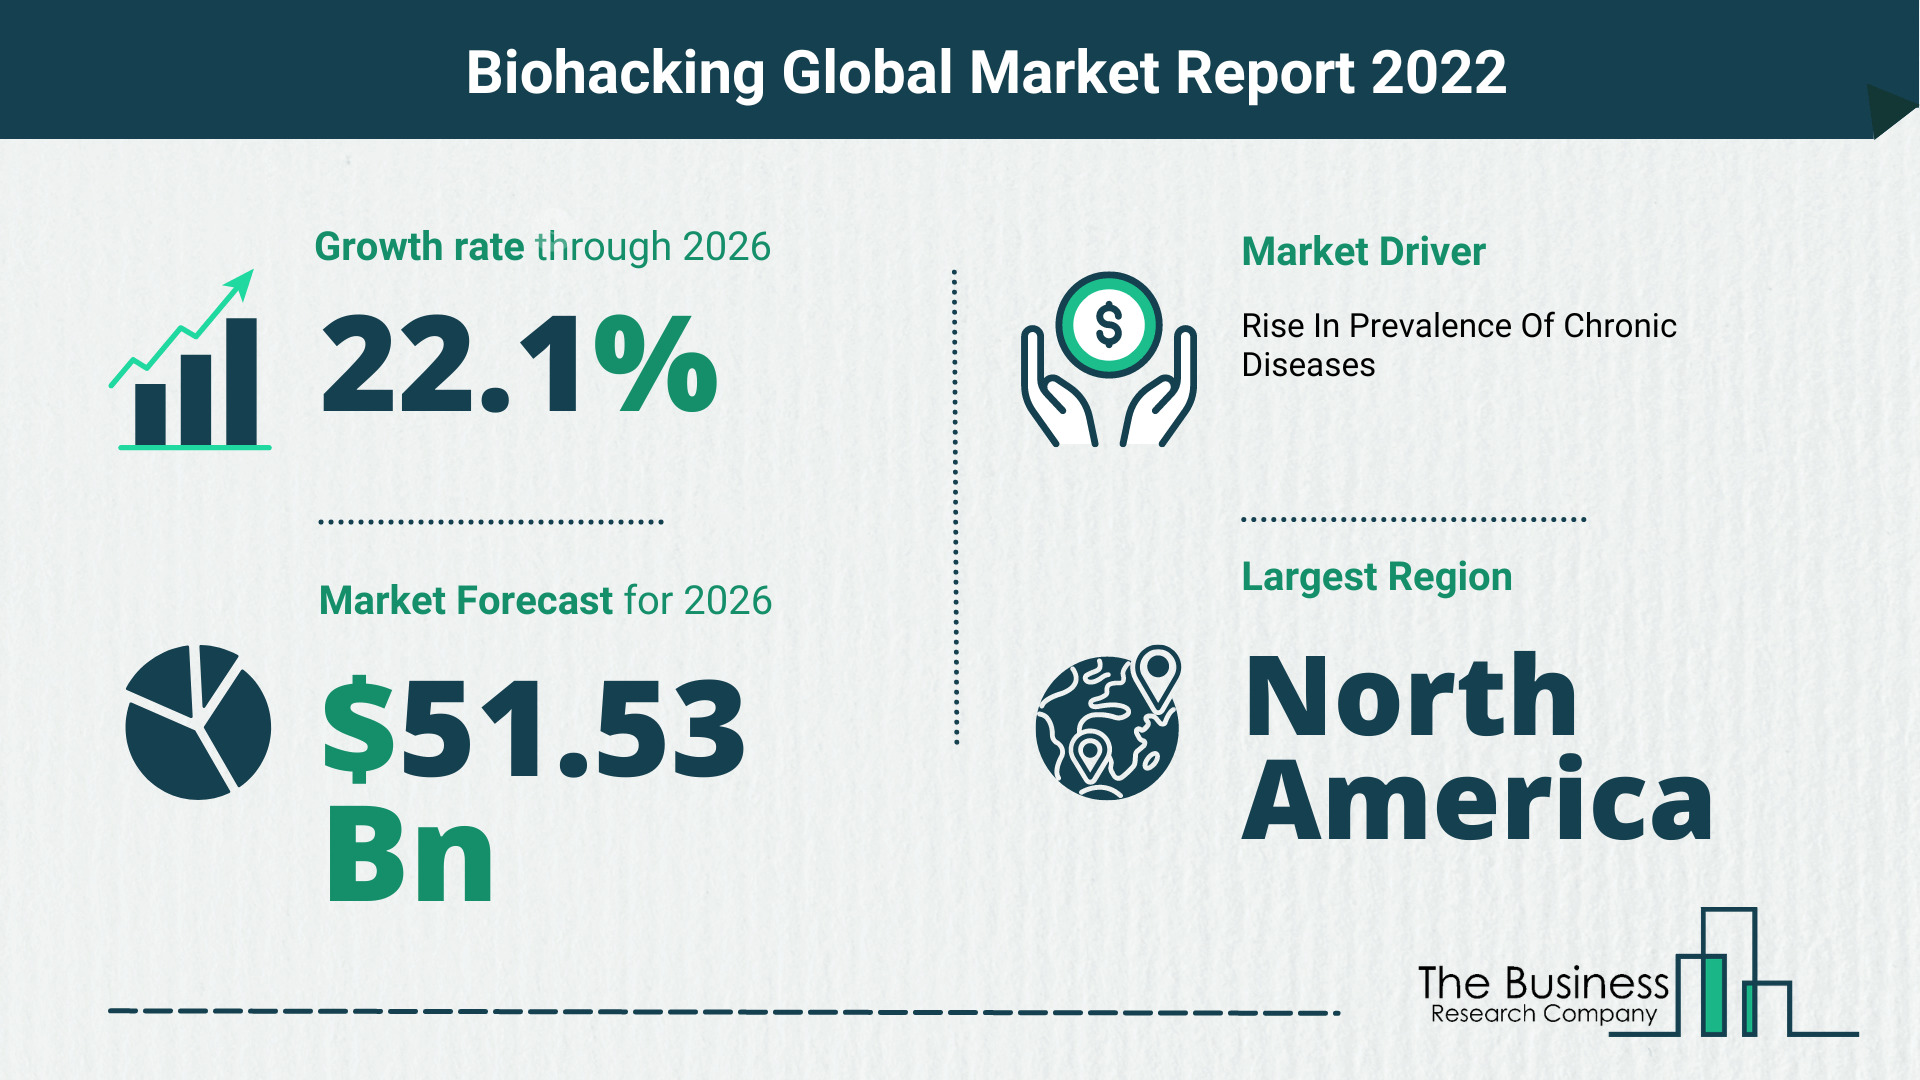 What Is The Biohacking Market Overview In 2022?